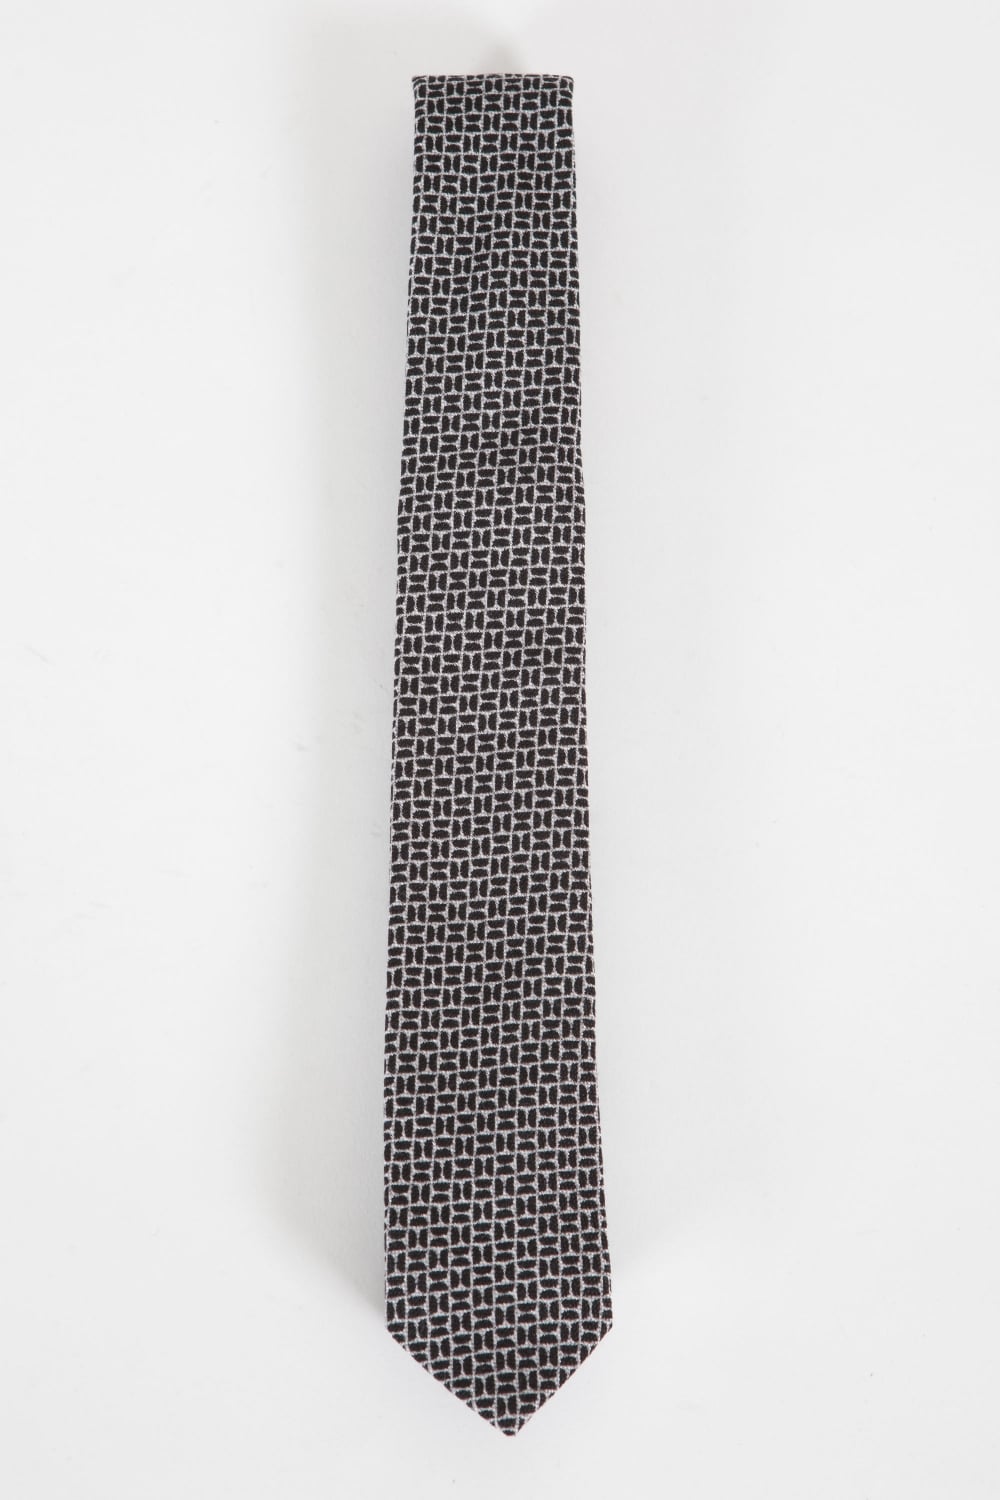 Buy the Remus Uomo Narrow Tie Grey/Black at Intro. Spend £50 for free UK delivery. Official stockists. We ship worldwide.